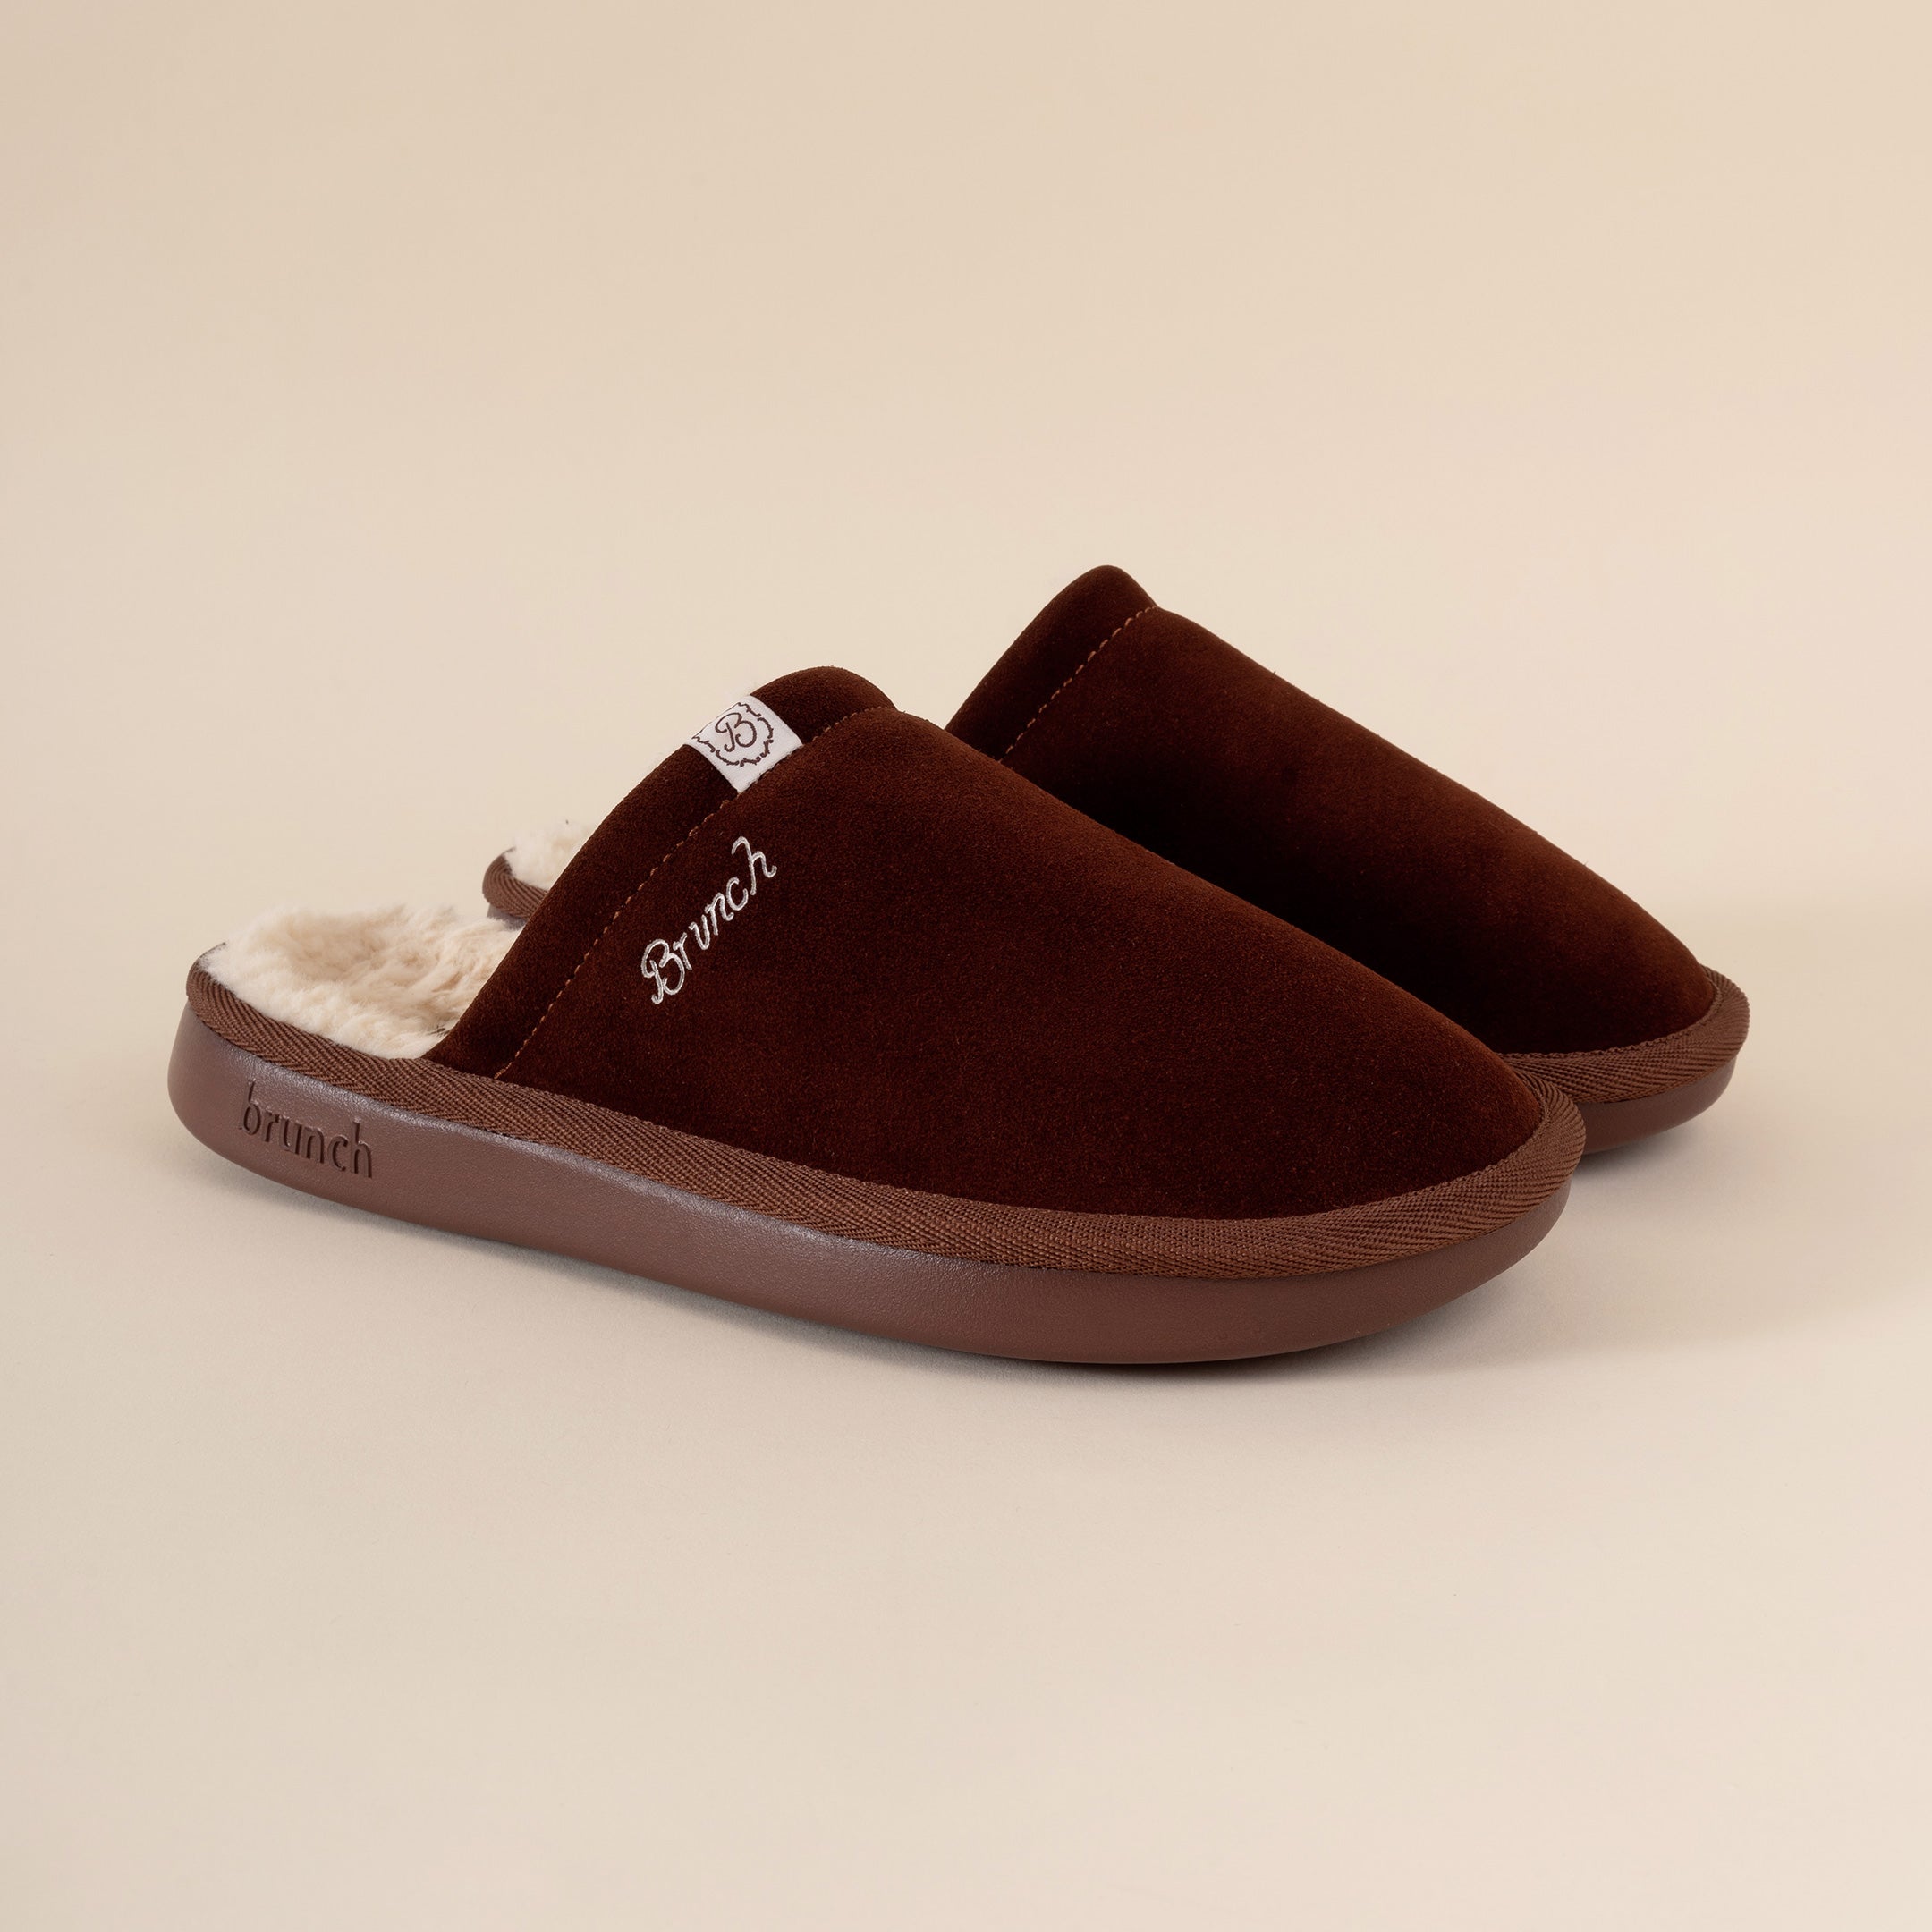 Fenland Ladies Sheepskin Slipper – Radford Leather Fashions-Quality Leather  and Sheepskin Jackets for Men and Women. Coventry, West Midlands, UK for  over 40 years